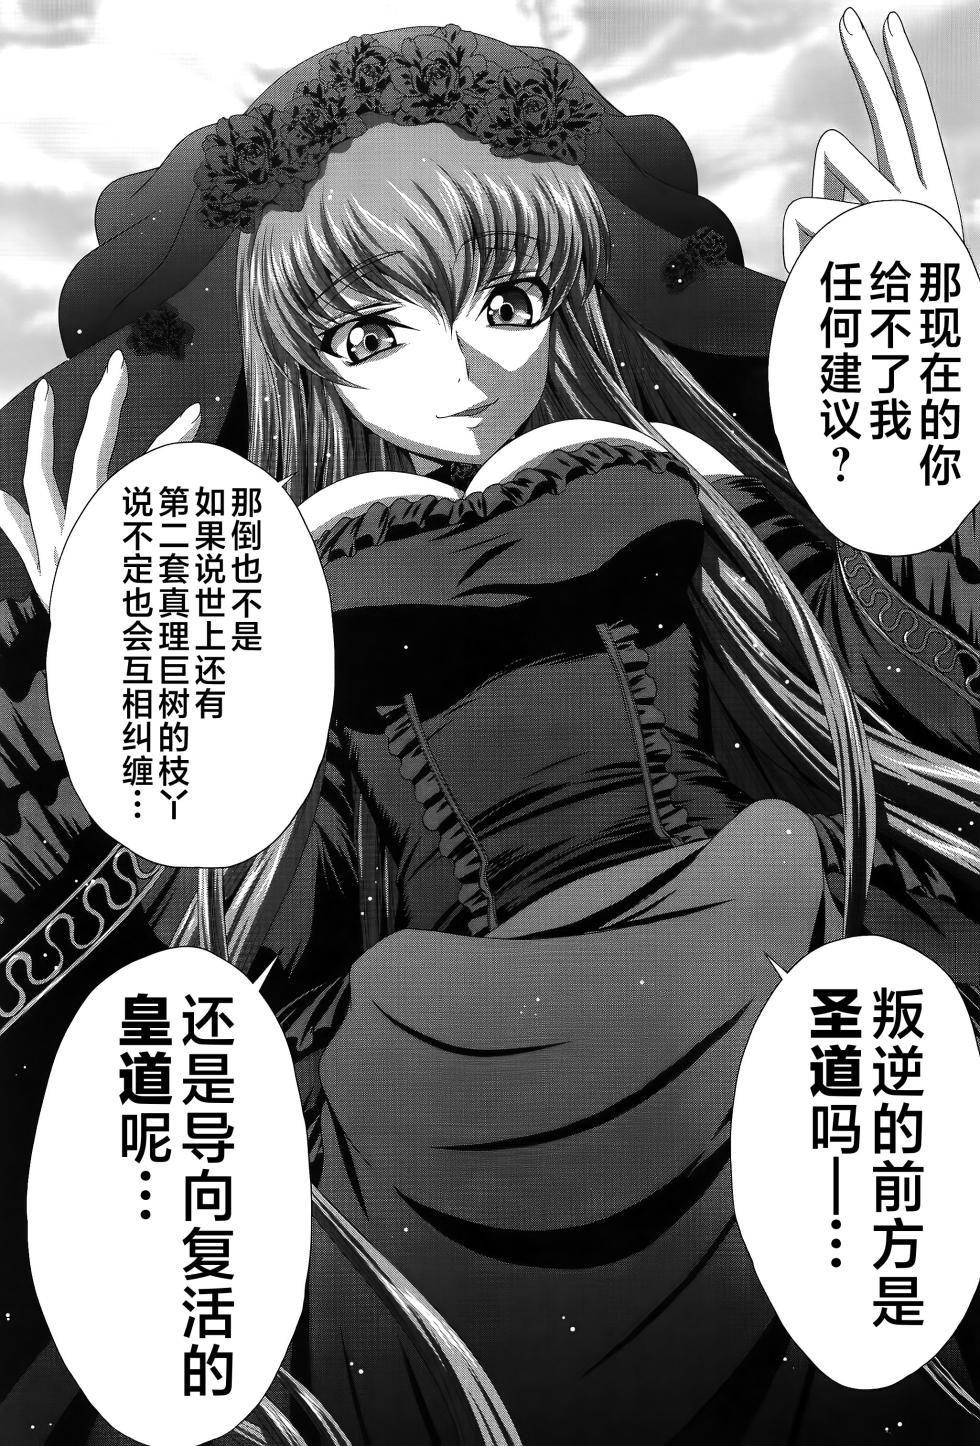 (C103) [Blue Bean (Kaname Aomame)] C2lemon@Max8 (Code Geass: Lelouch of the Rebellion) [Chinese] [不咕鸟汉化组] - Page 32